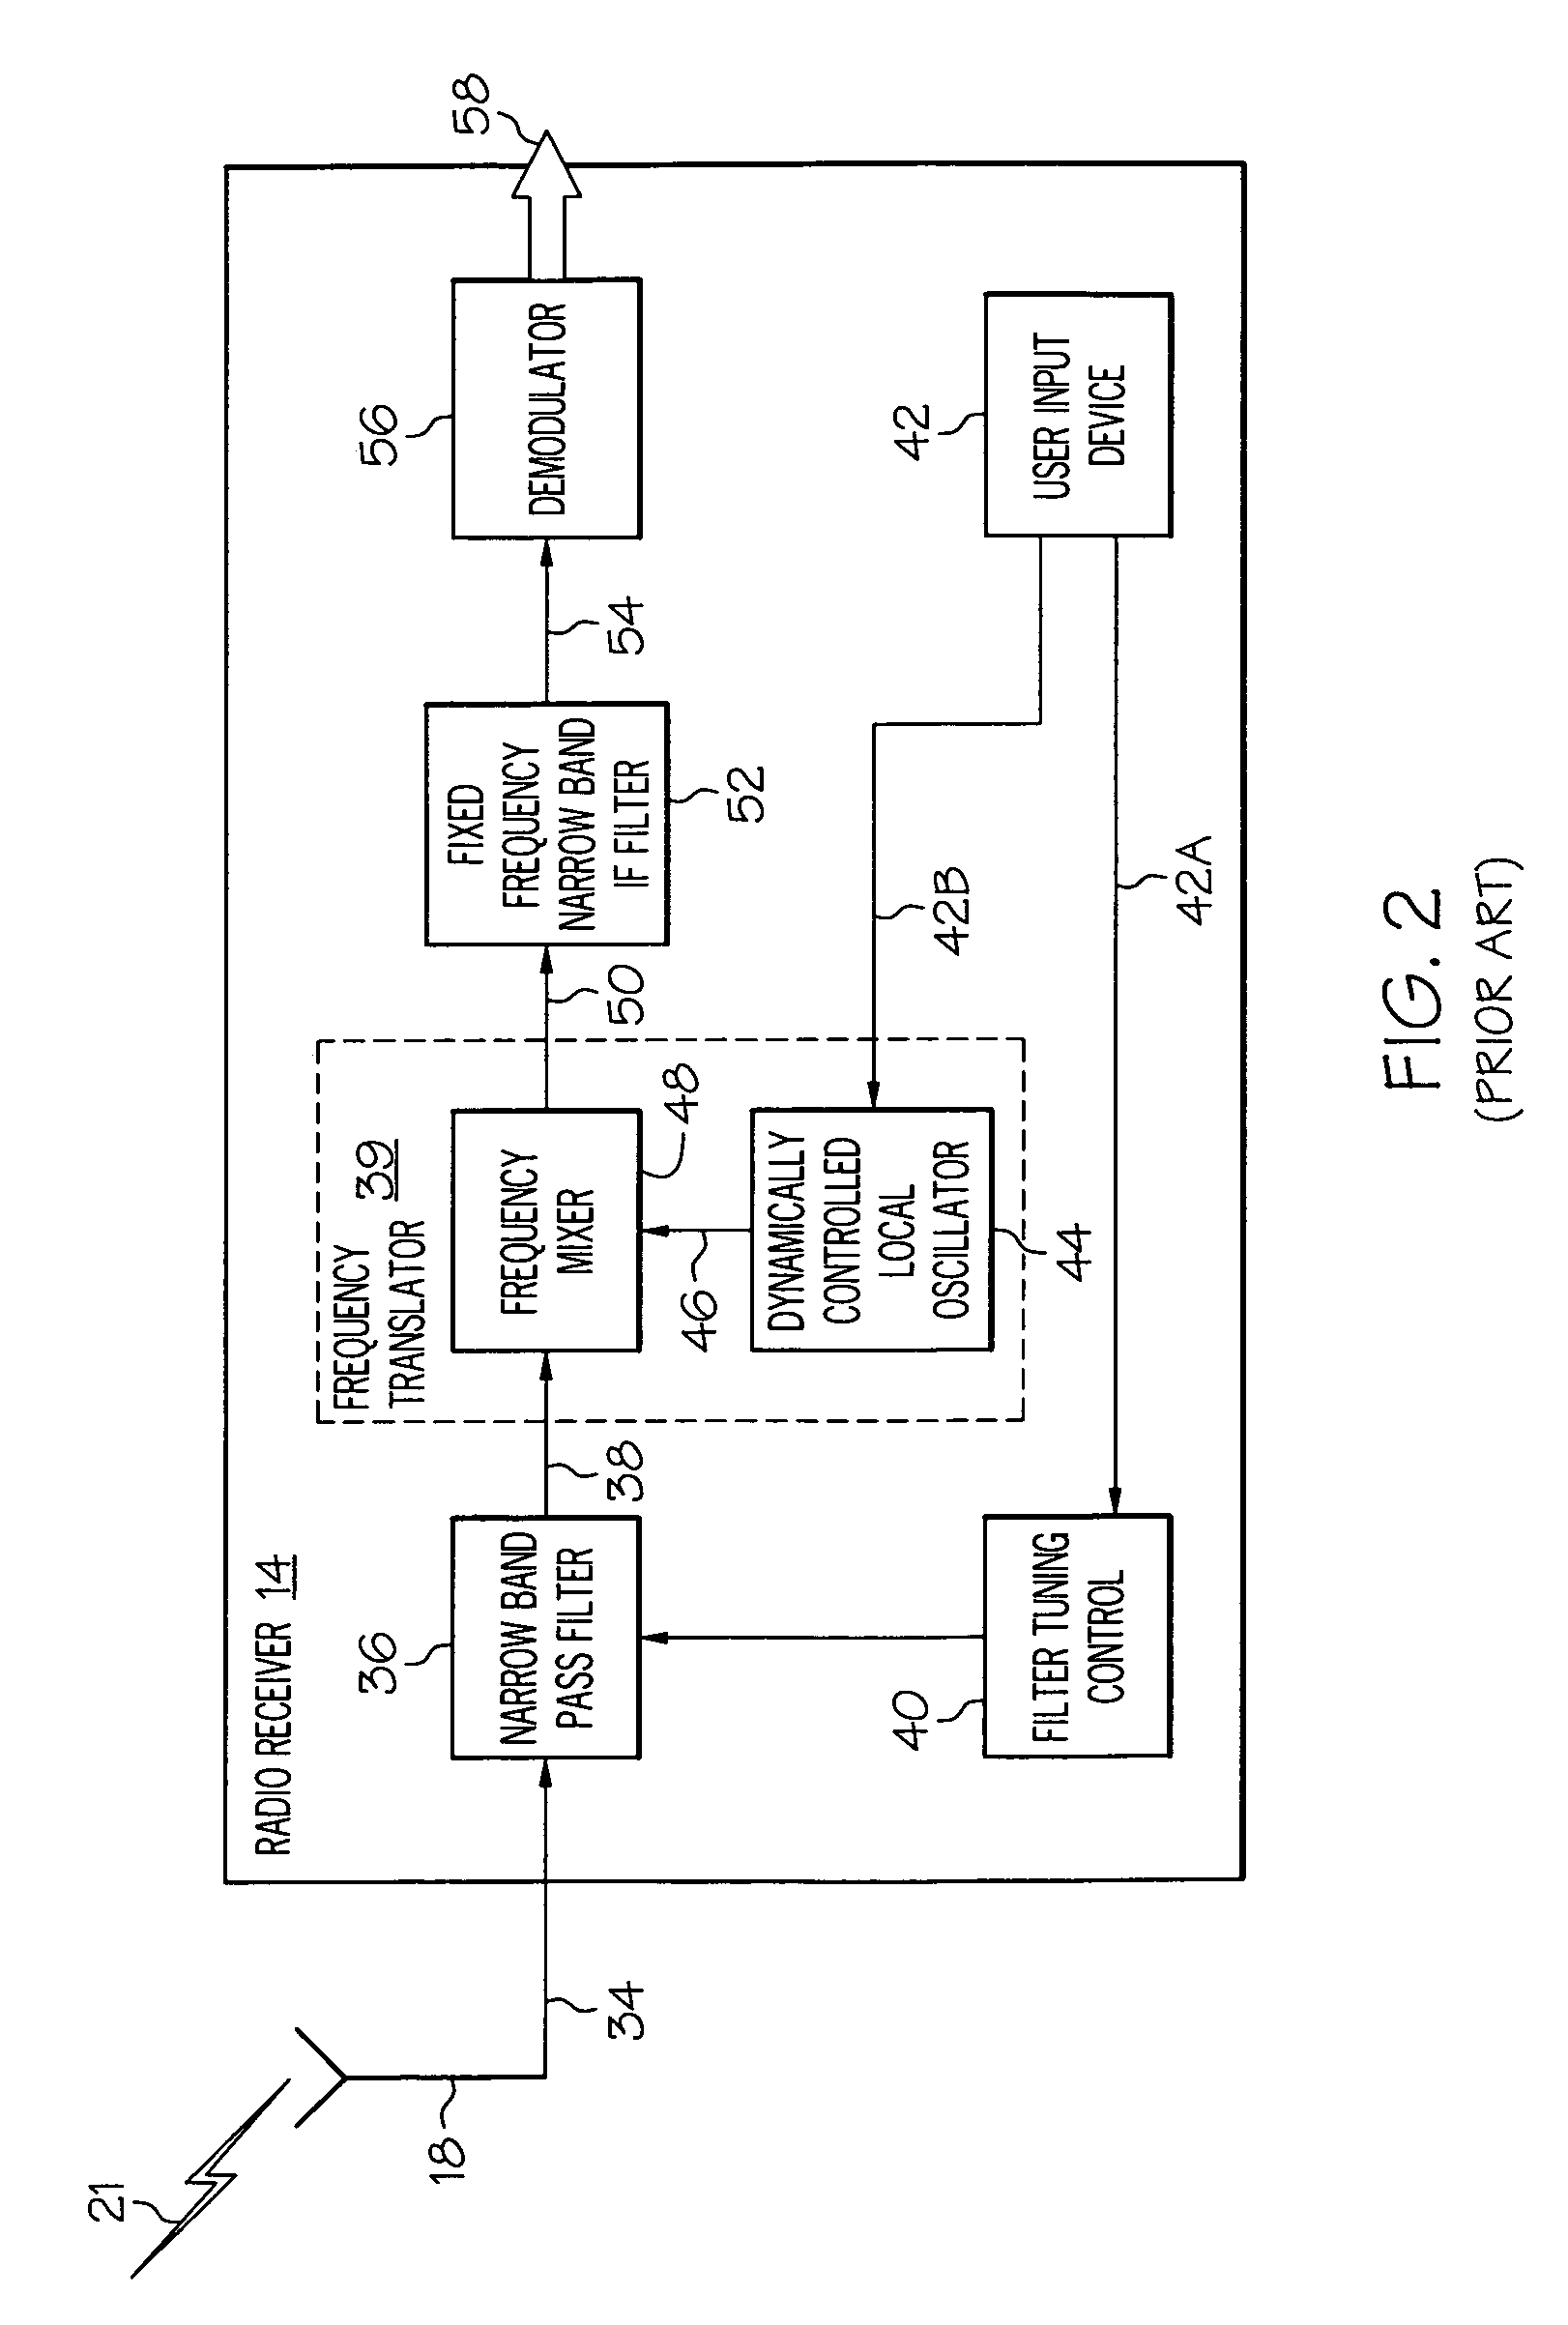 Systems and methods for reducing radio receiver interference from an on-board avionics transmitter